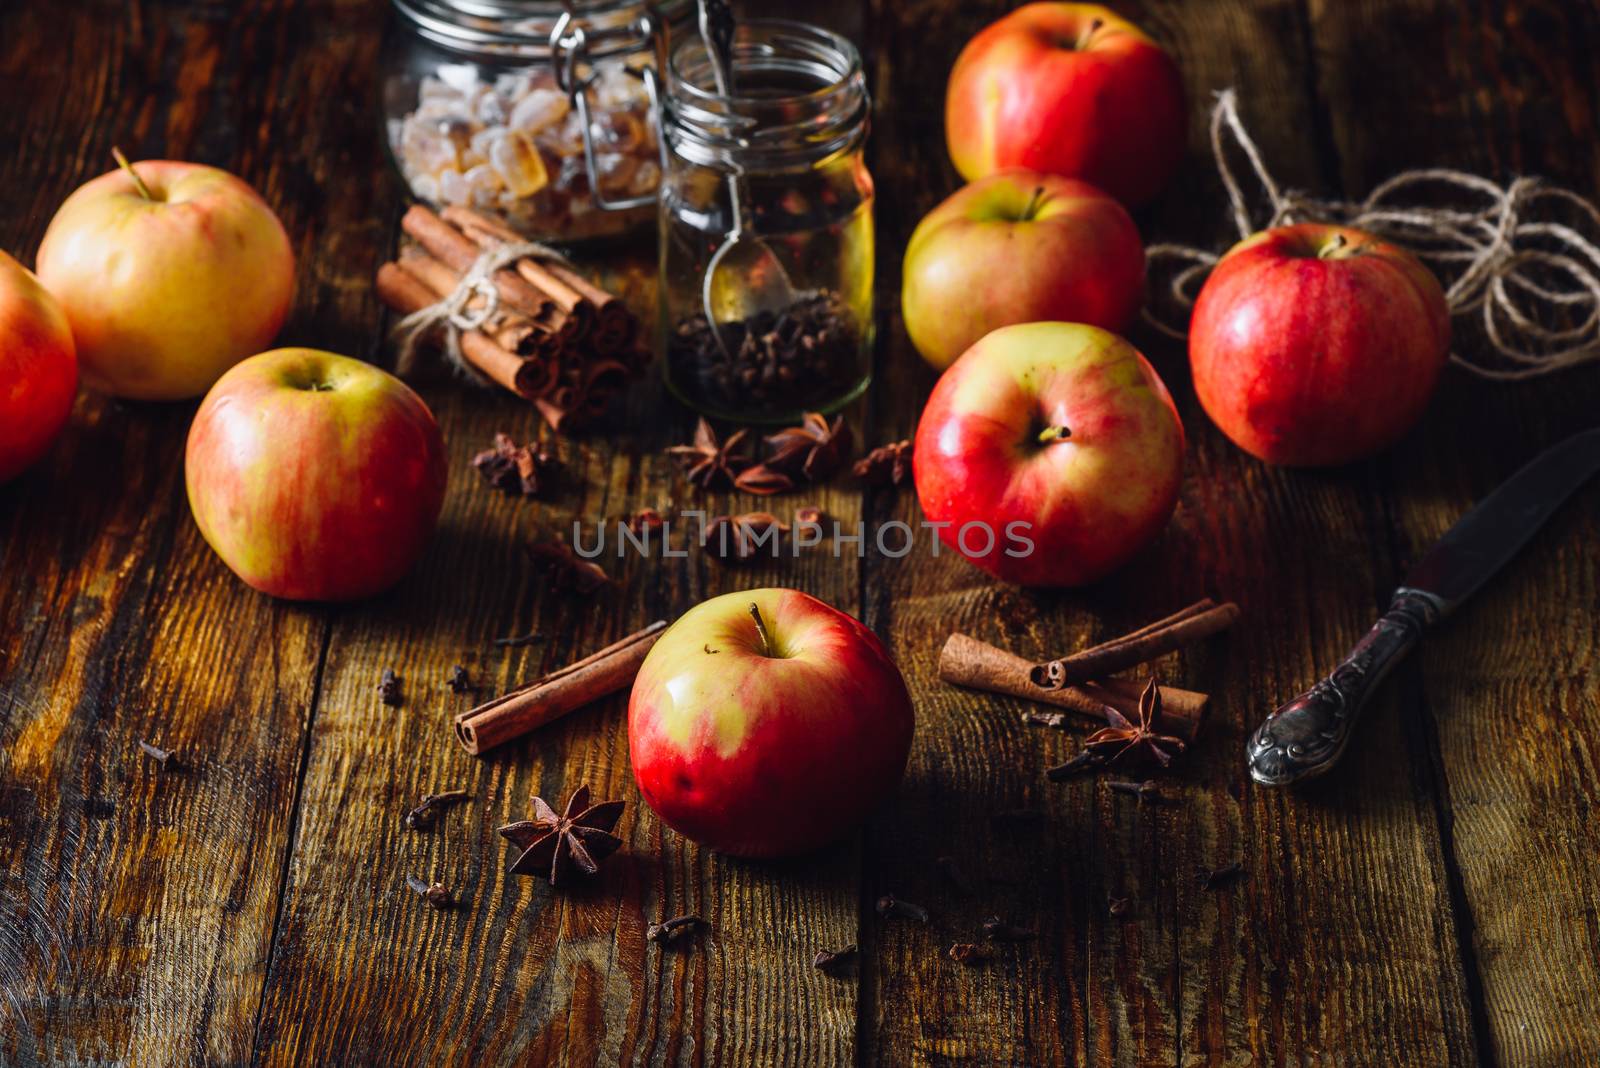 Red Apples with Different Spices. by Seva_blsv